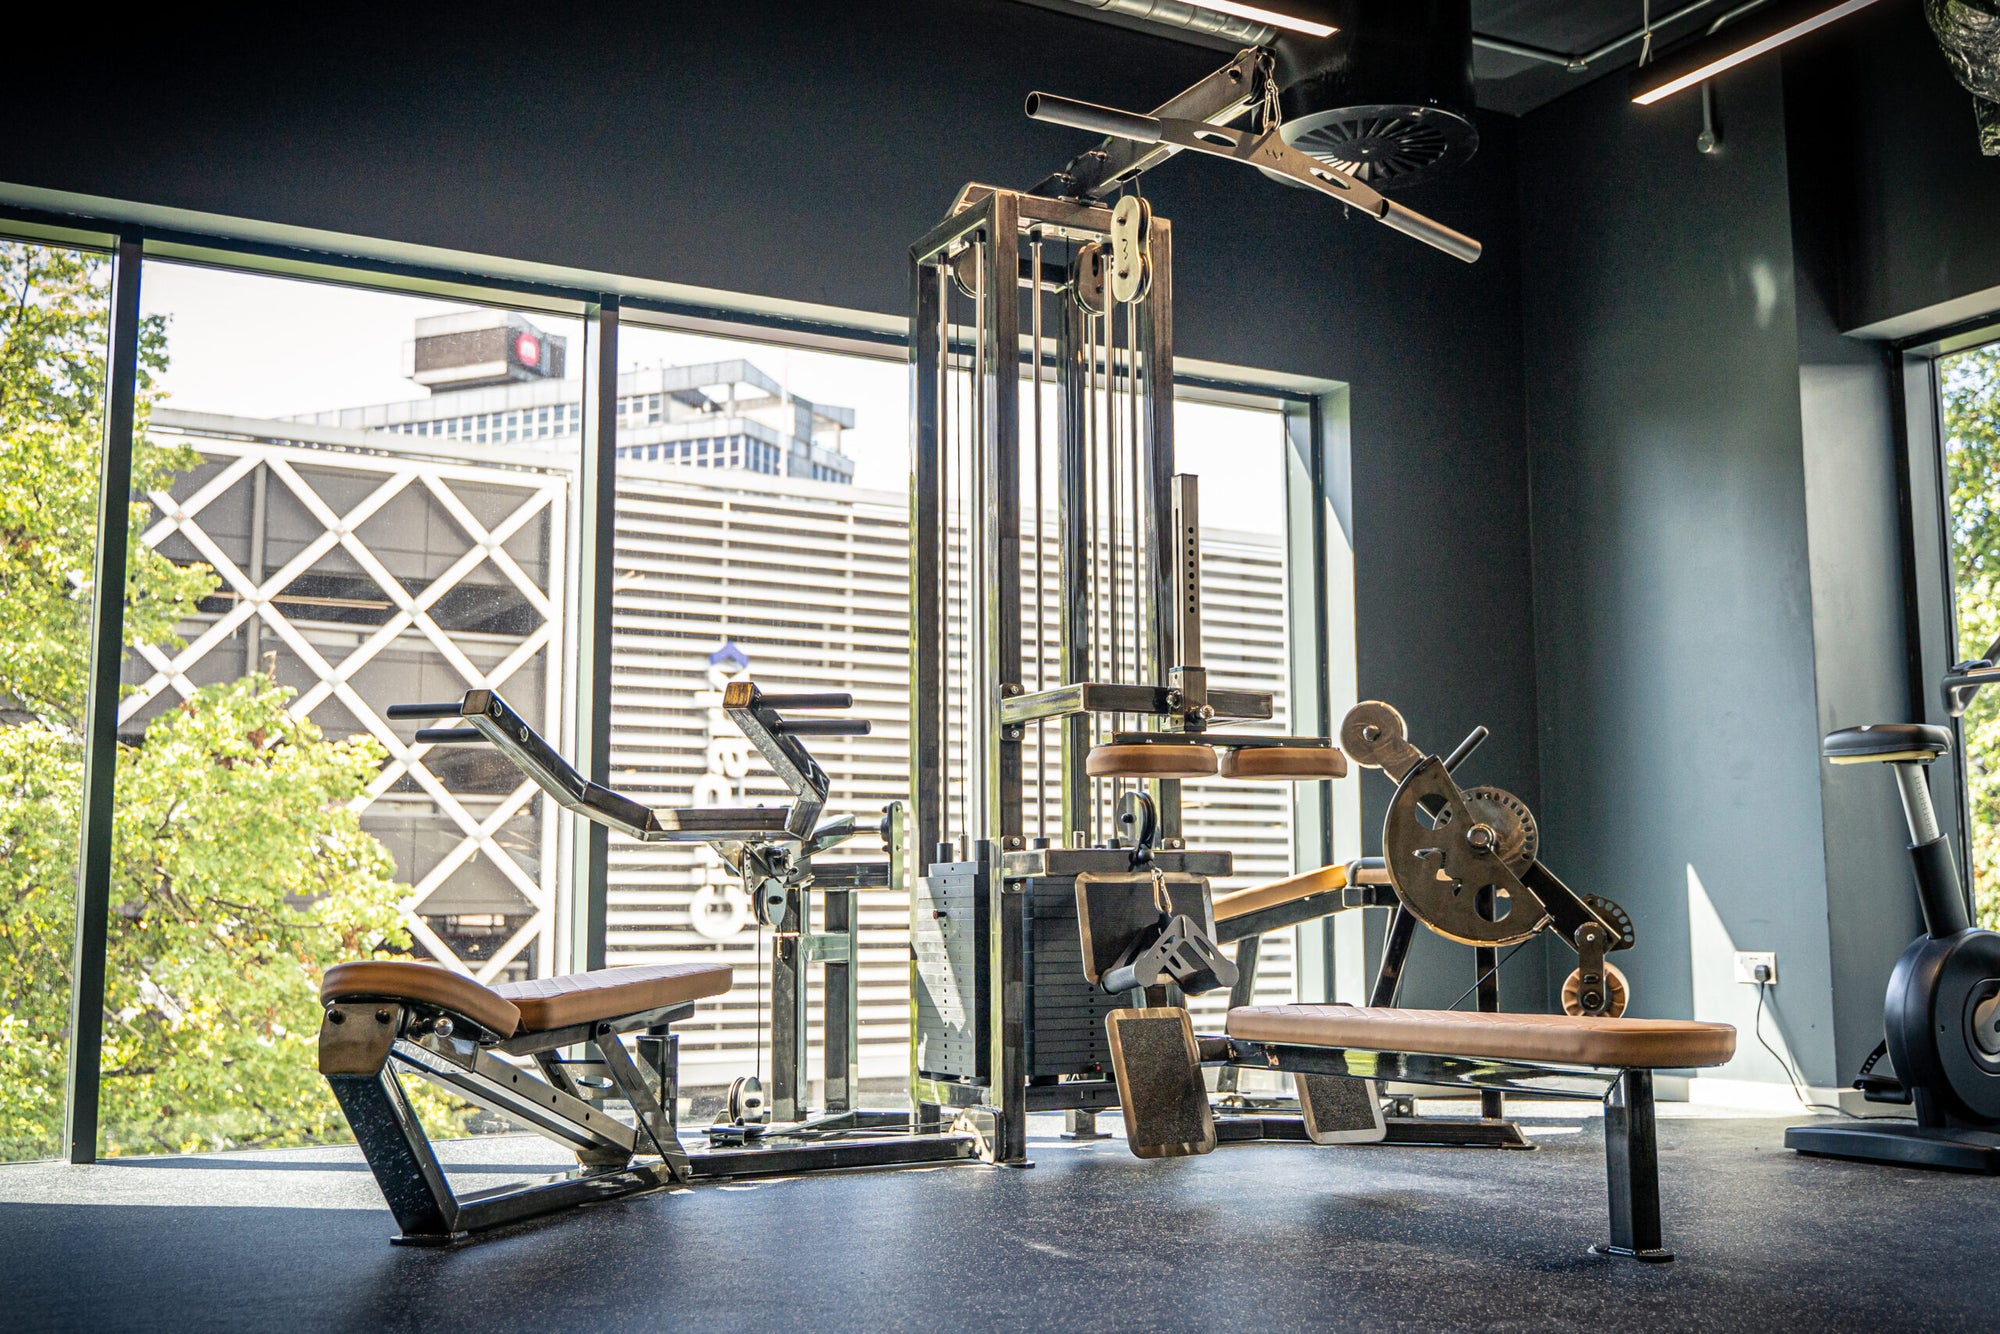 Watson Custom Benches - How to provide that personal touch to your gym space